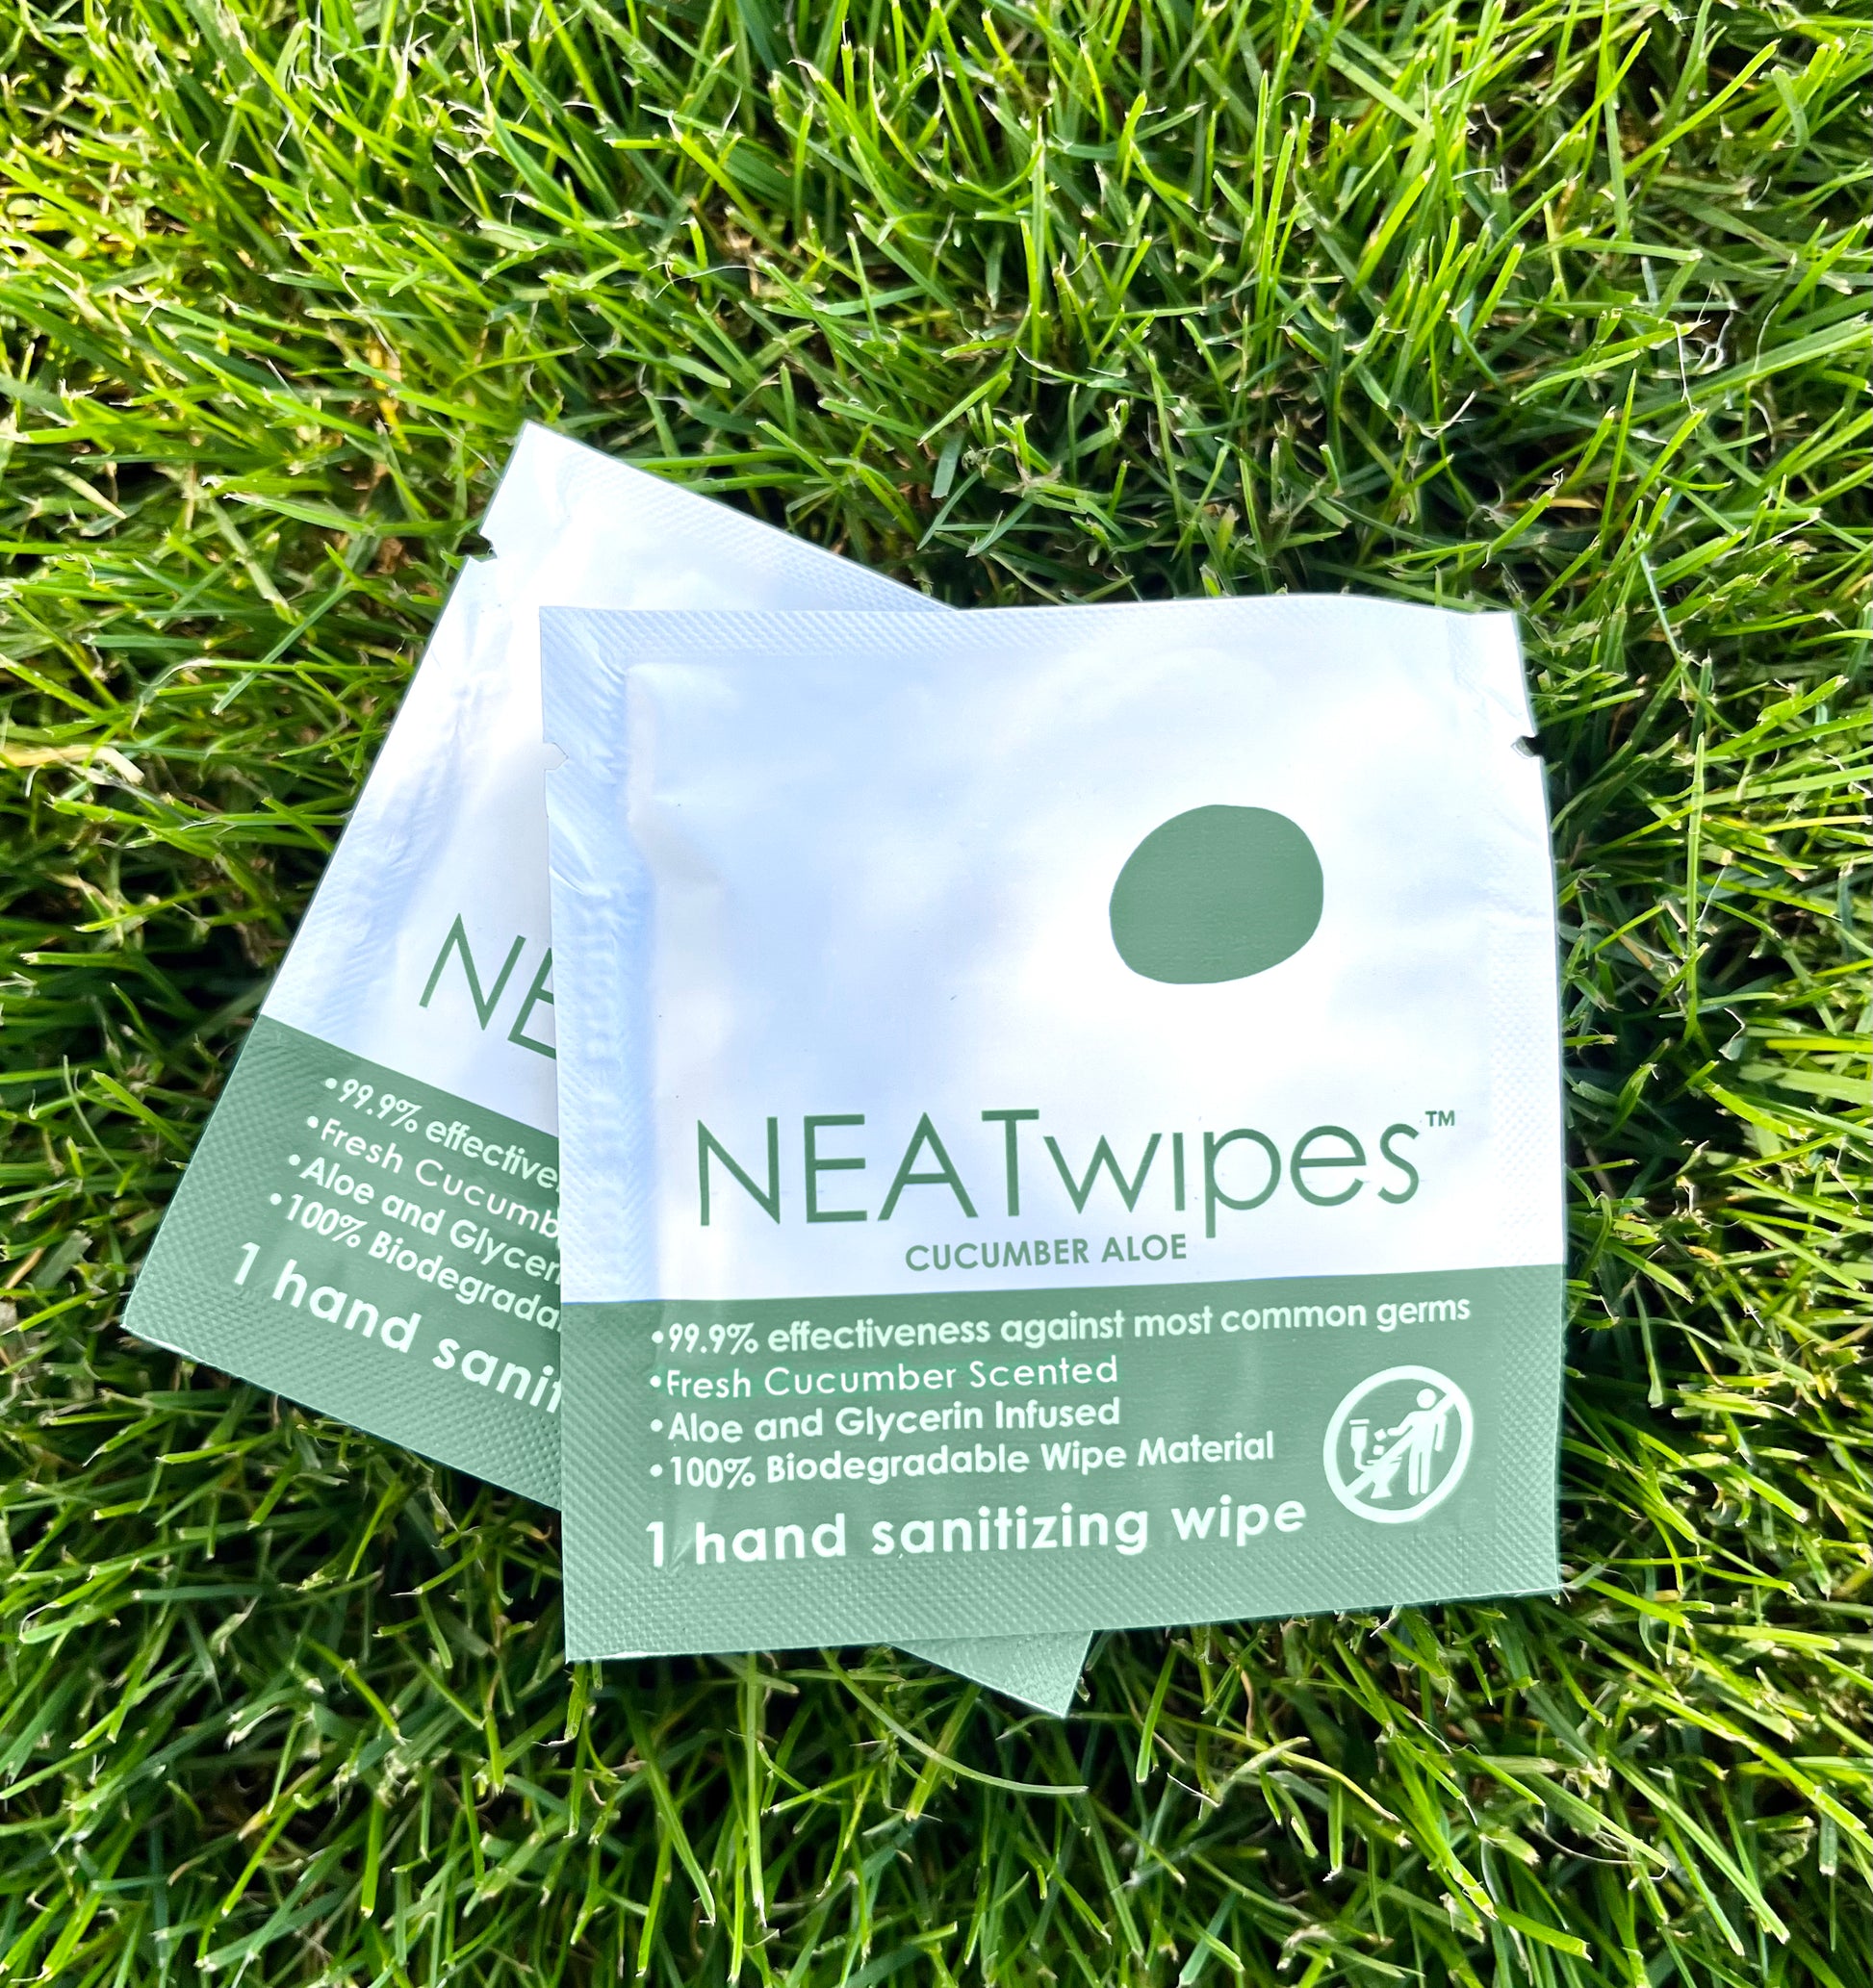 Individually wrapped NEATwipes Cucumber Aloe hand wipes on grass..